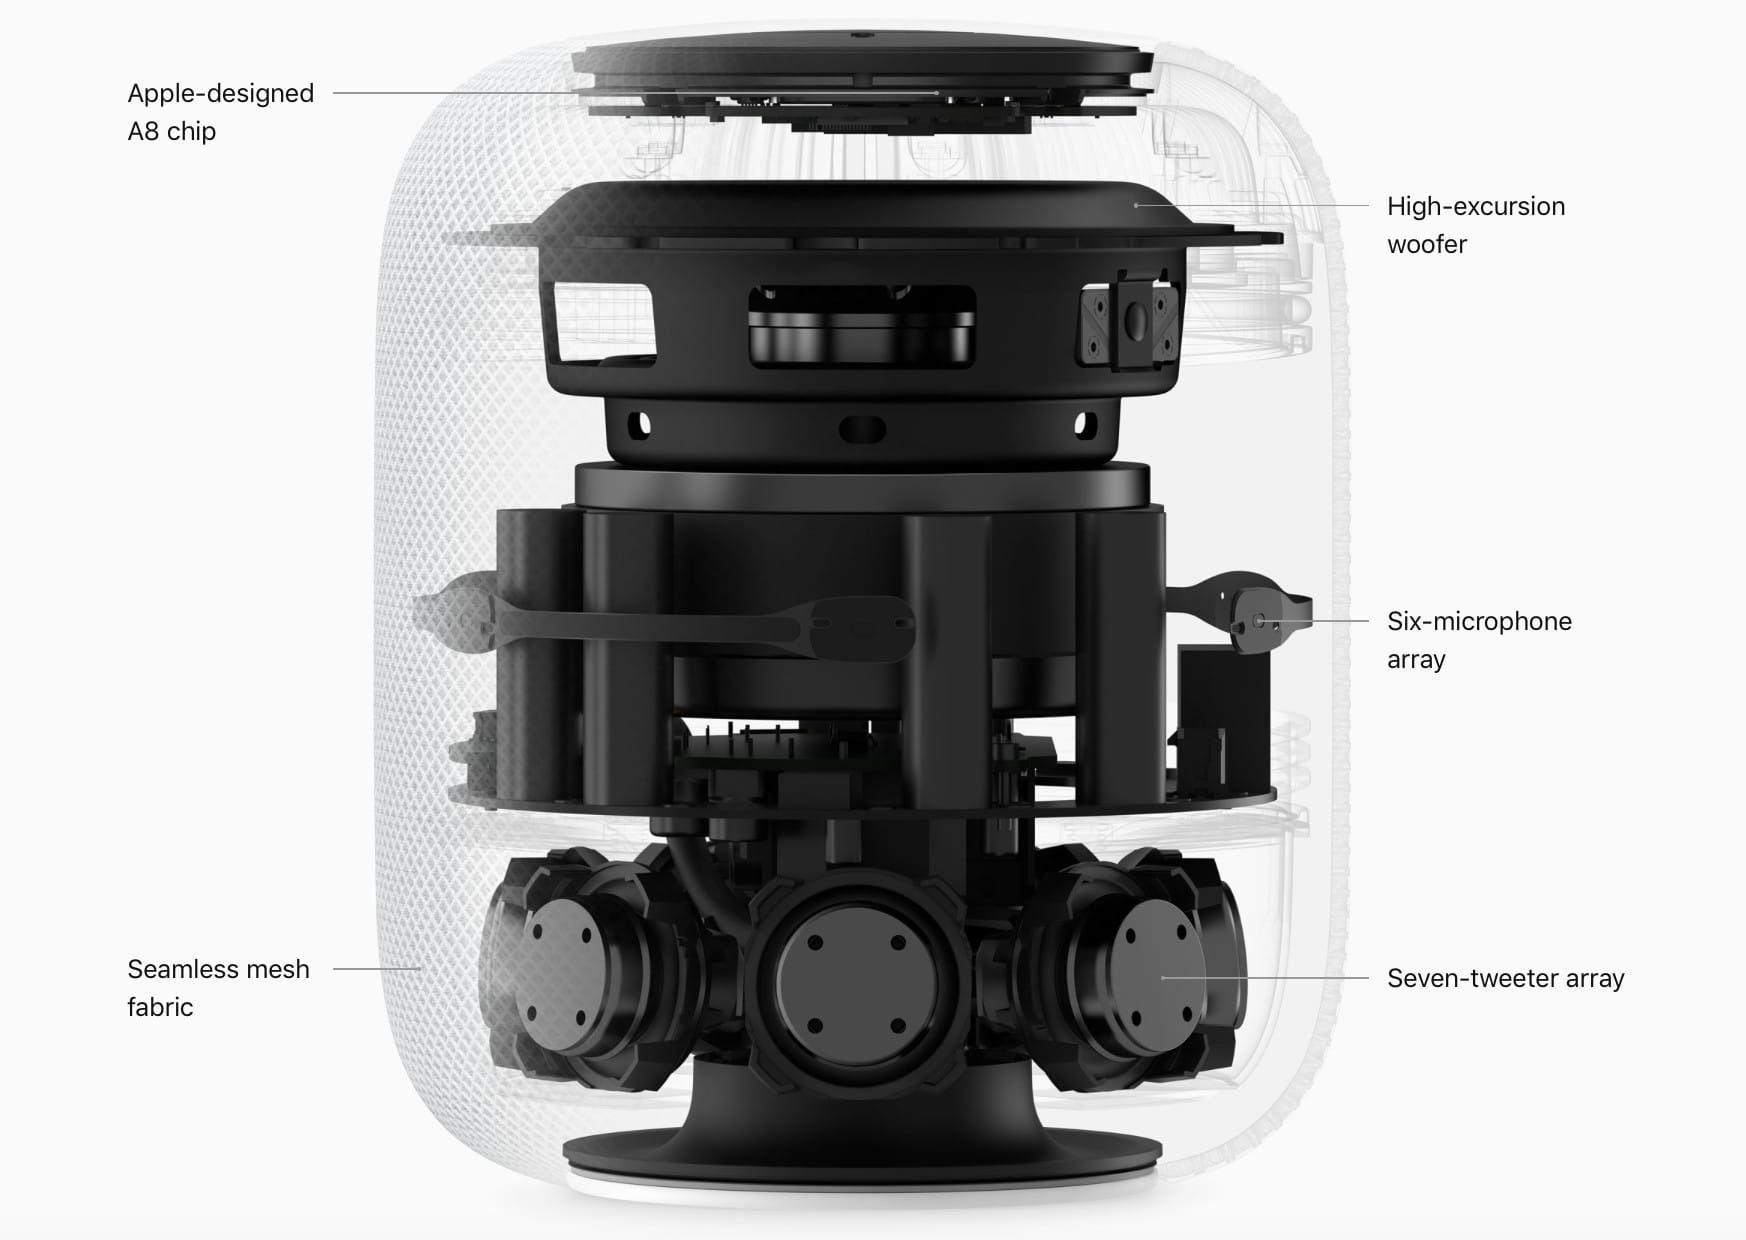 X-ray view of HomePod